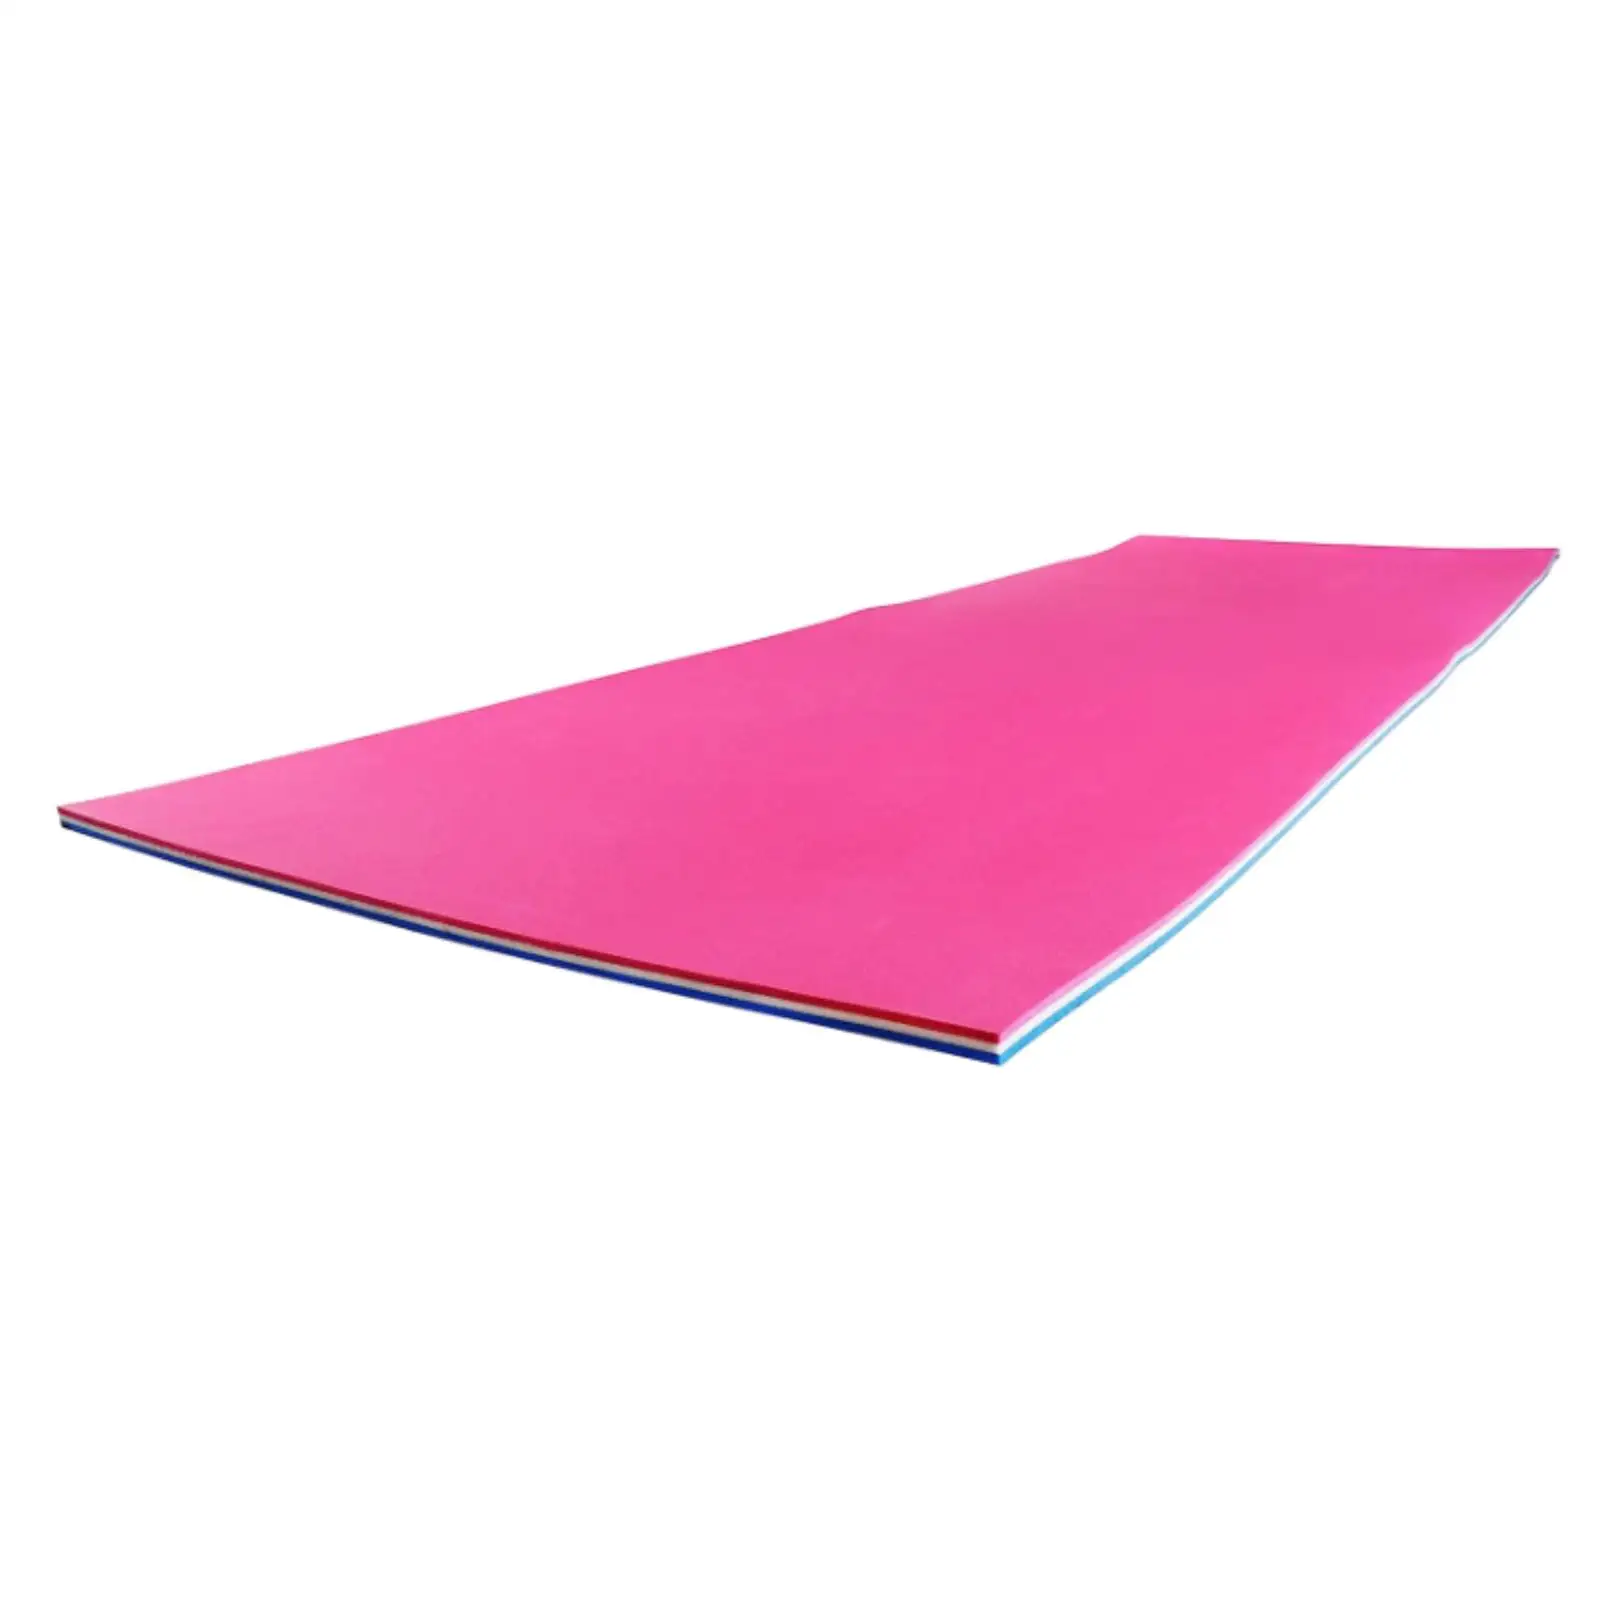 Water Floating Mat High Density Water Recreation Unsinkable Play Floats Mattress for Adults Swimming Pool Outdoor River Boating